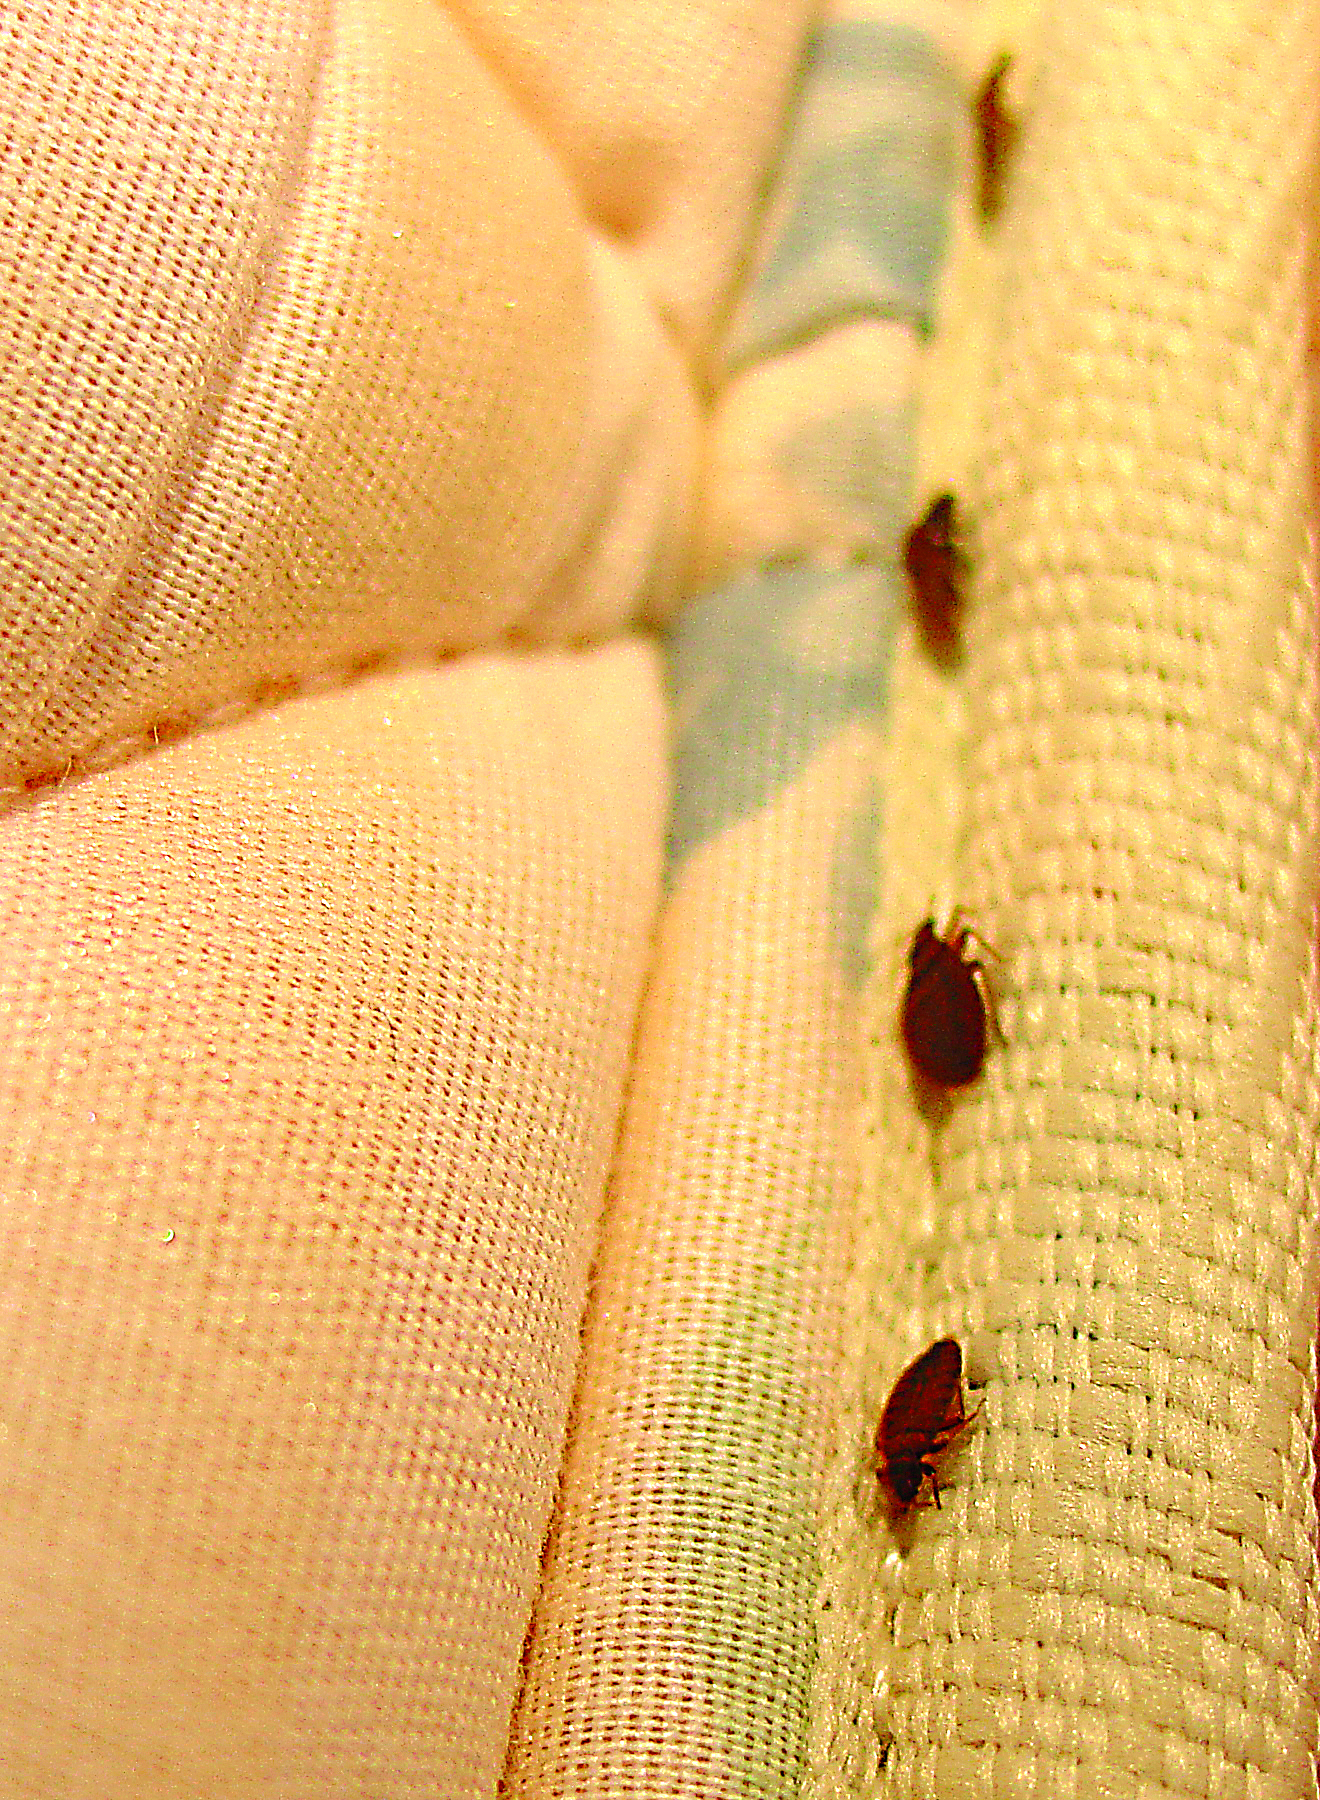 Bedbugs in Mattress Covers